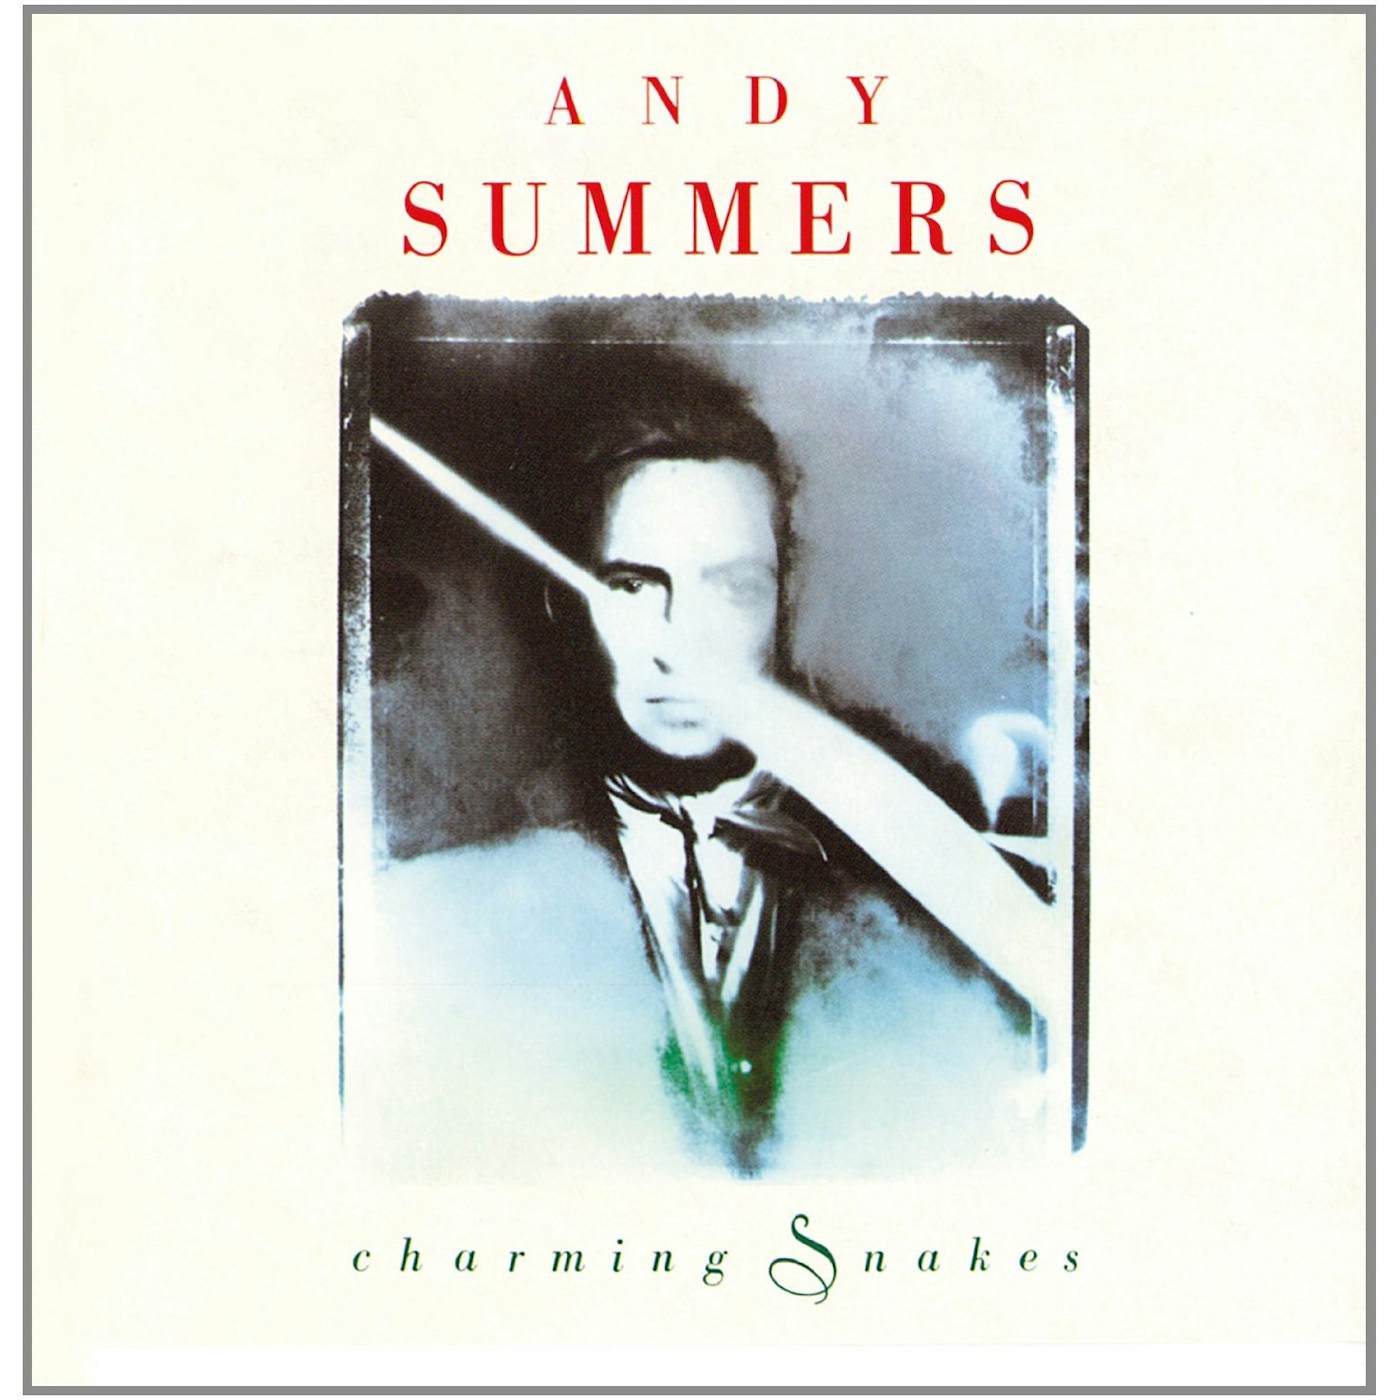 Andy Summers CHARMING SNAKES CD